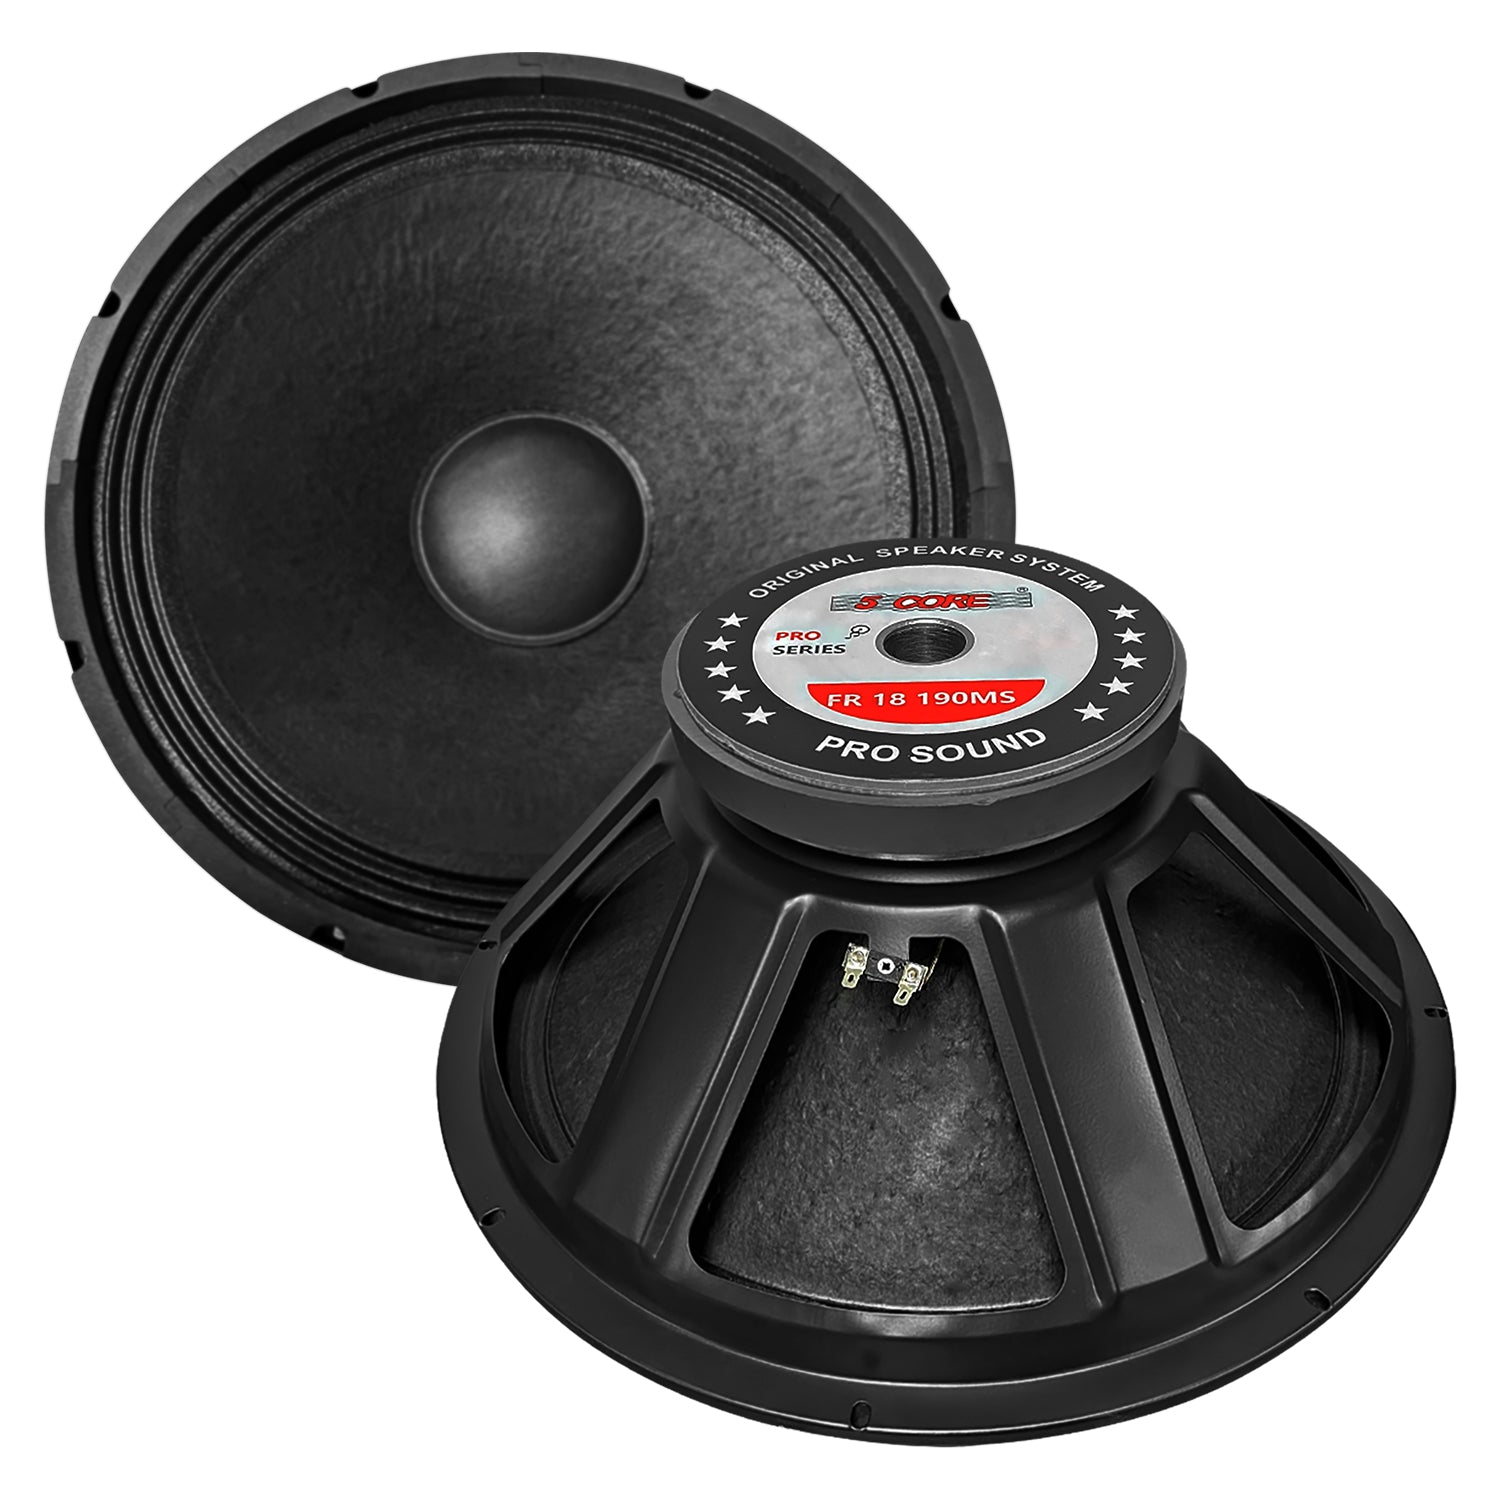 5 Core 18 Inch Subwoofer Speaker 1 Piece 500 Watt RMS Full Range DJ Sub Woofer Systems 8 Ohm Premium Magnet Raw Replacement Stereo Subwoofers w 4 Inch Voice Coil - FR 18 190 MS